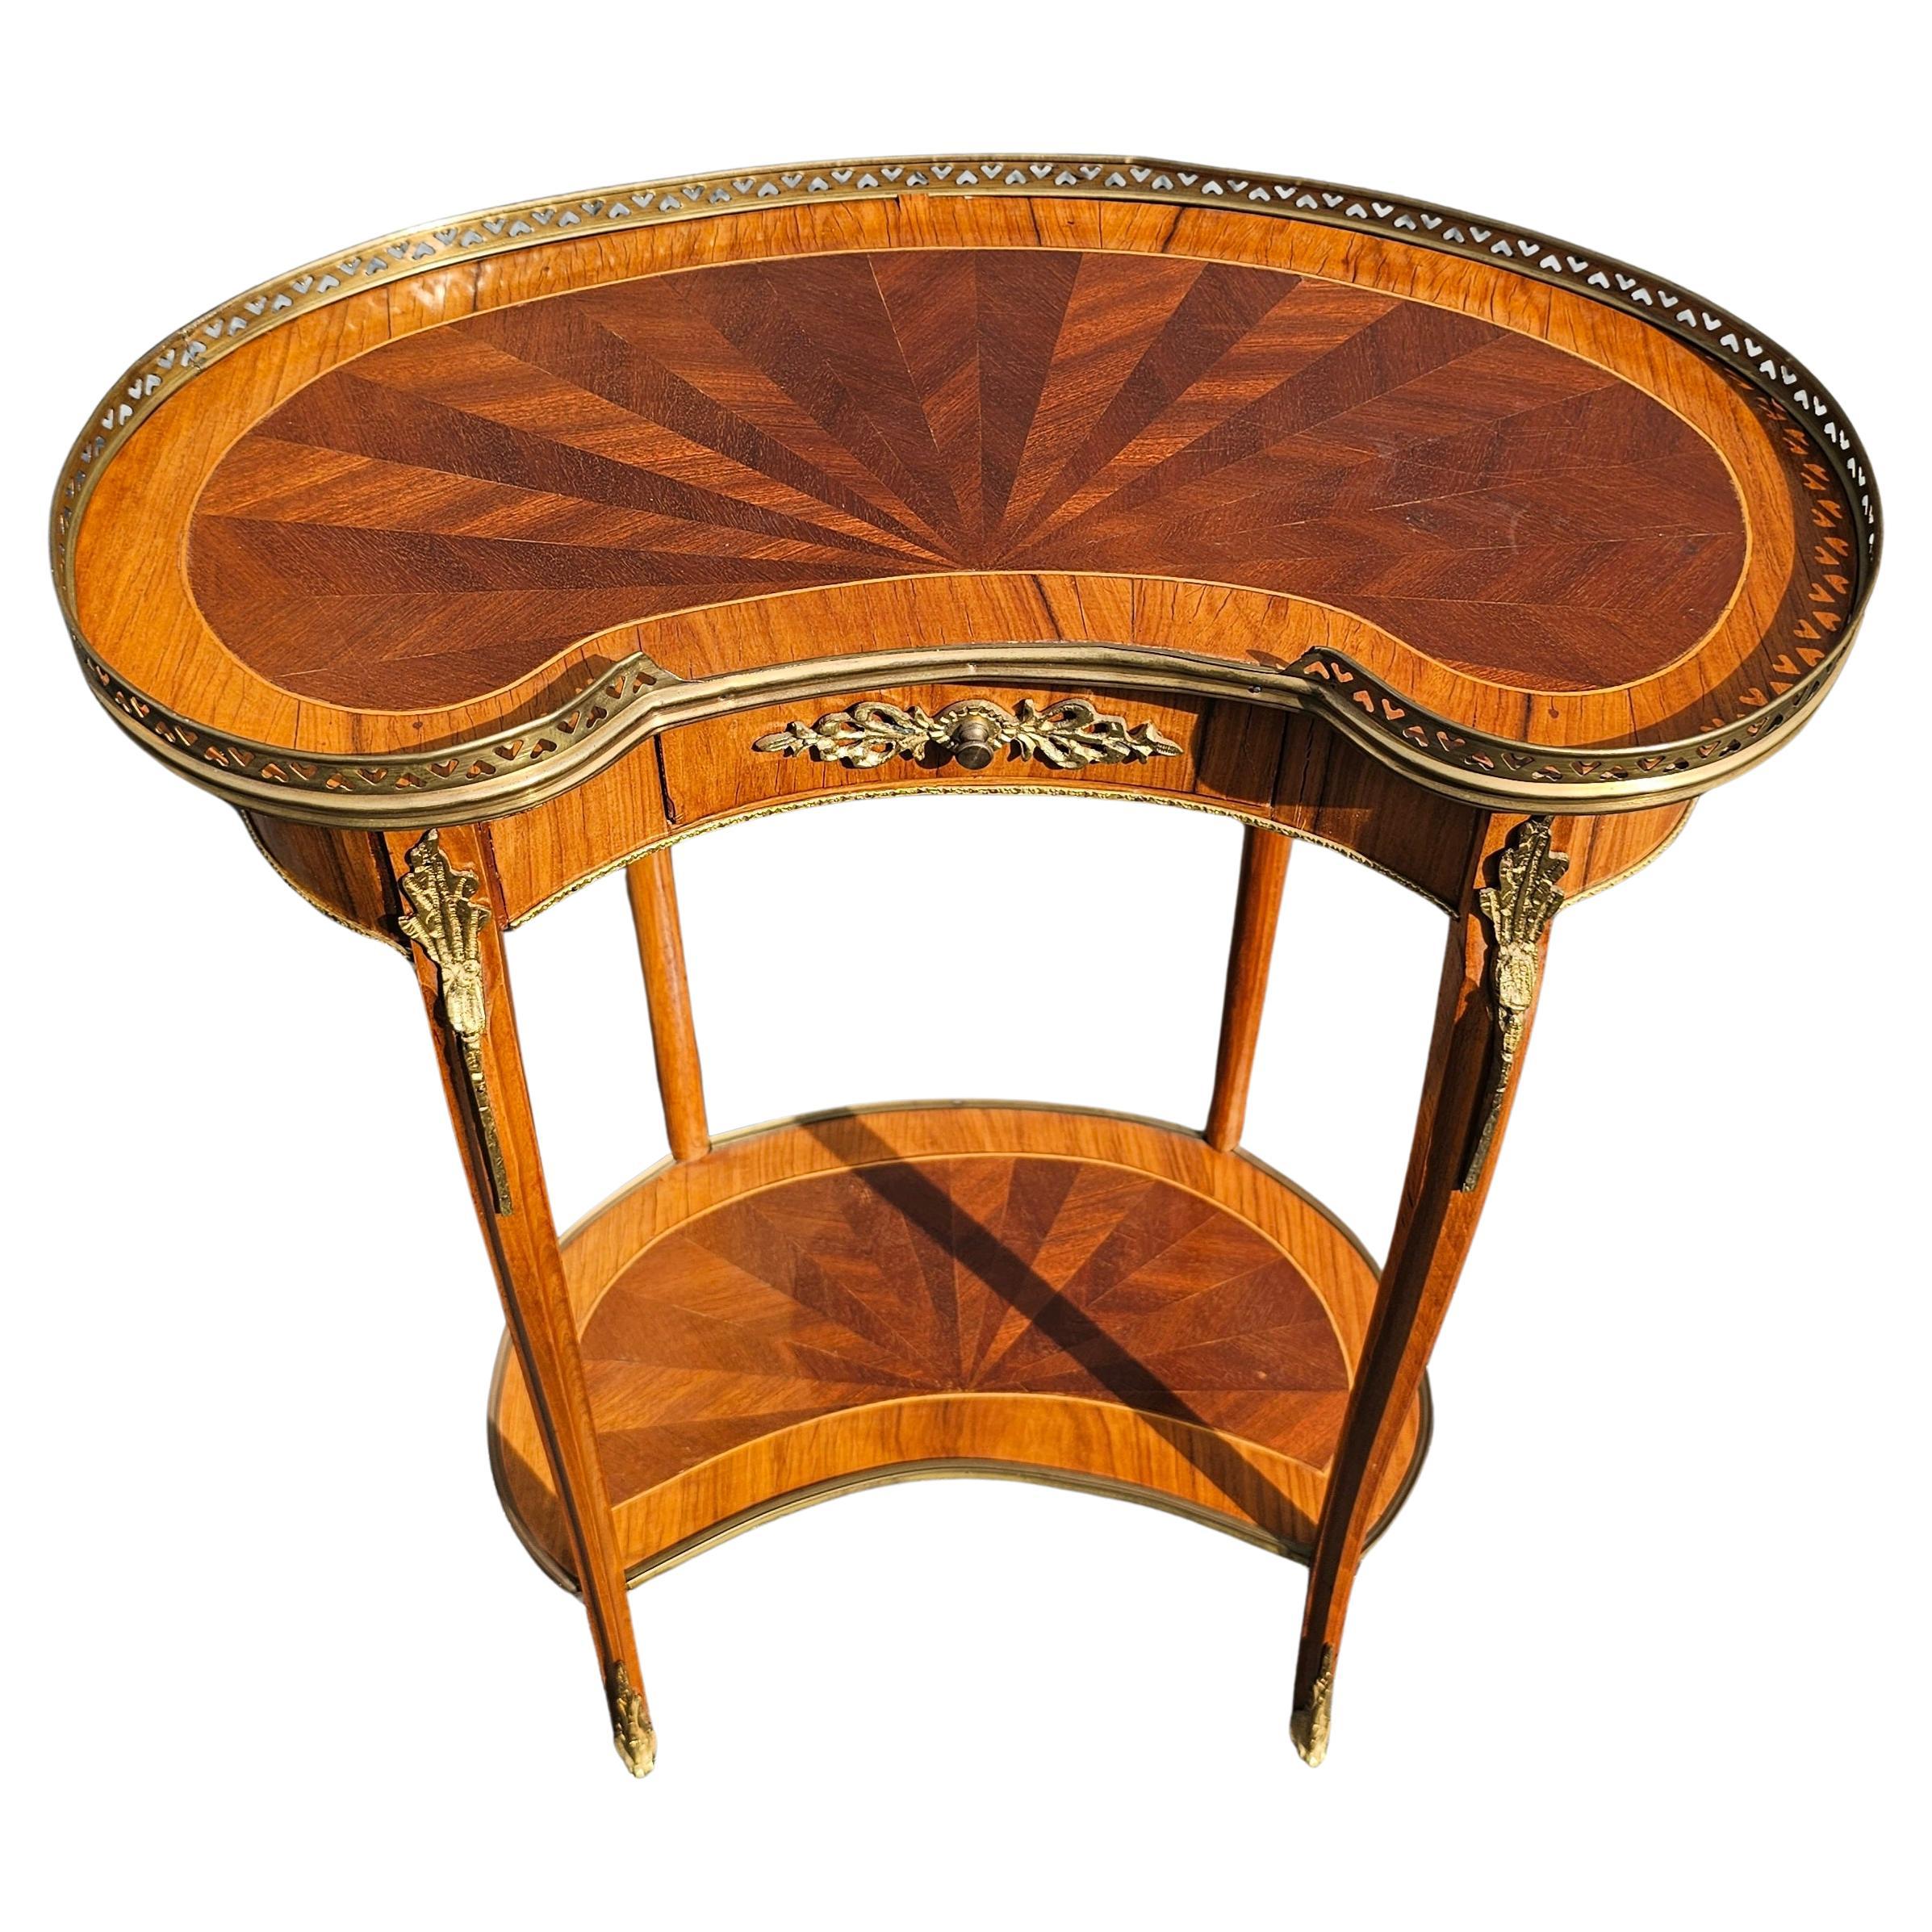 Pair Louis XV Ormolu Mounted Galleried Tulipwood And Kingwood Table Ambulante For Sale 3